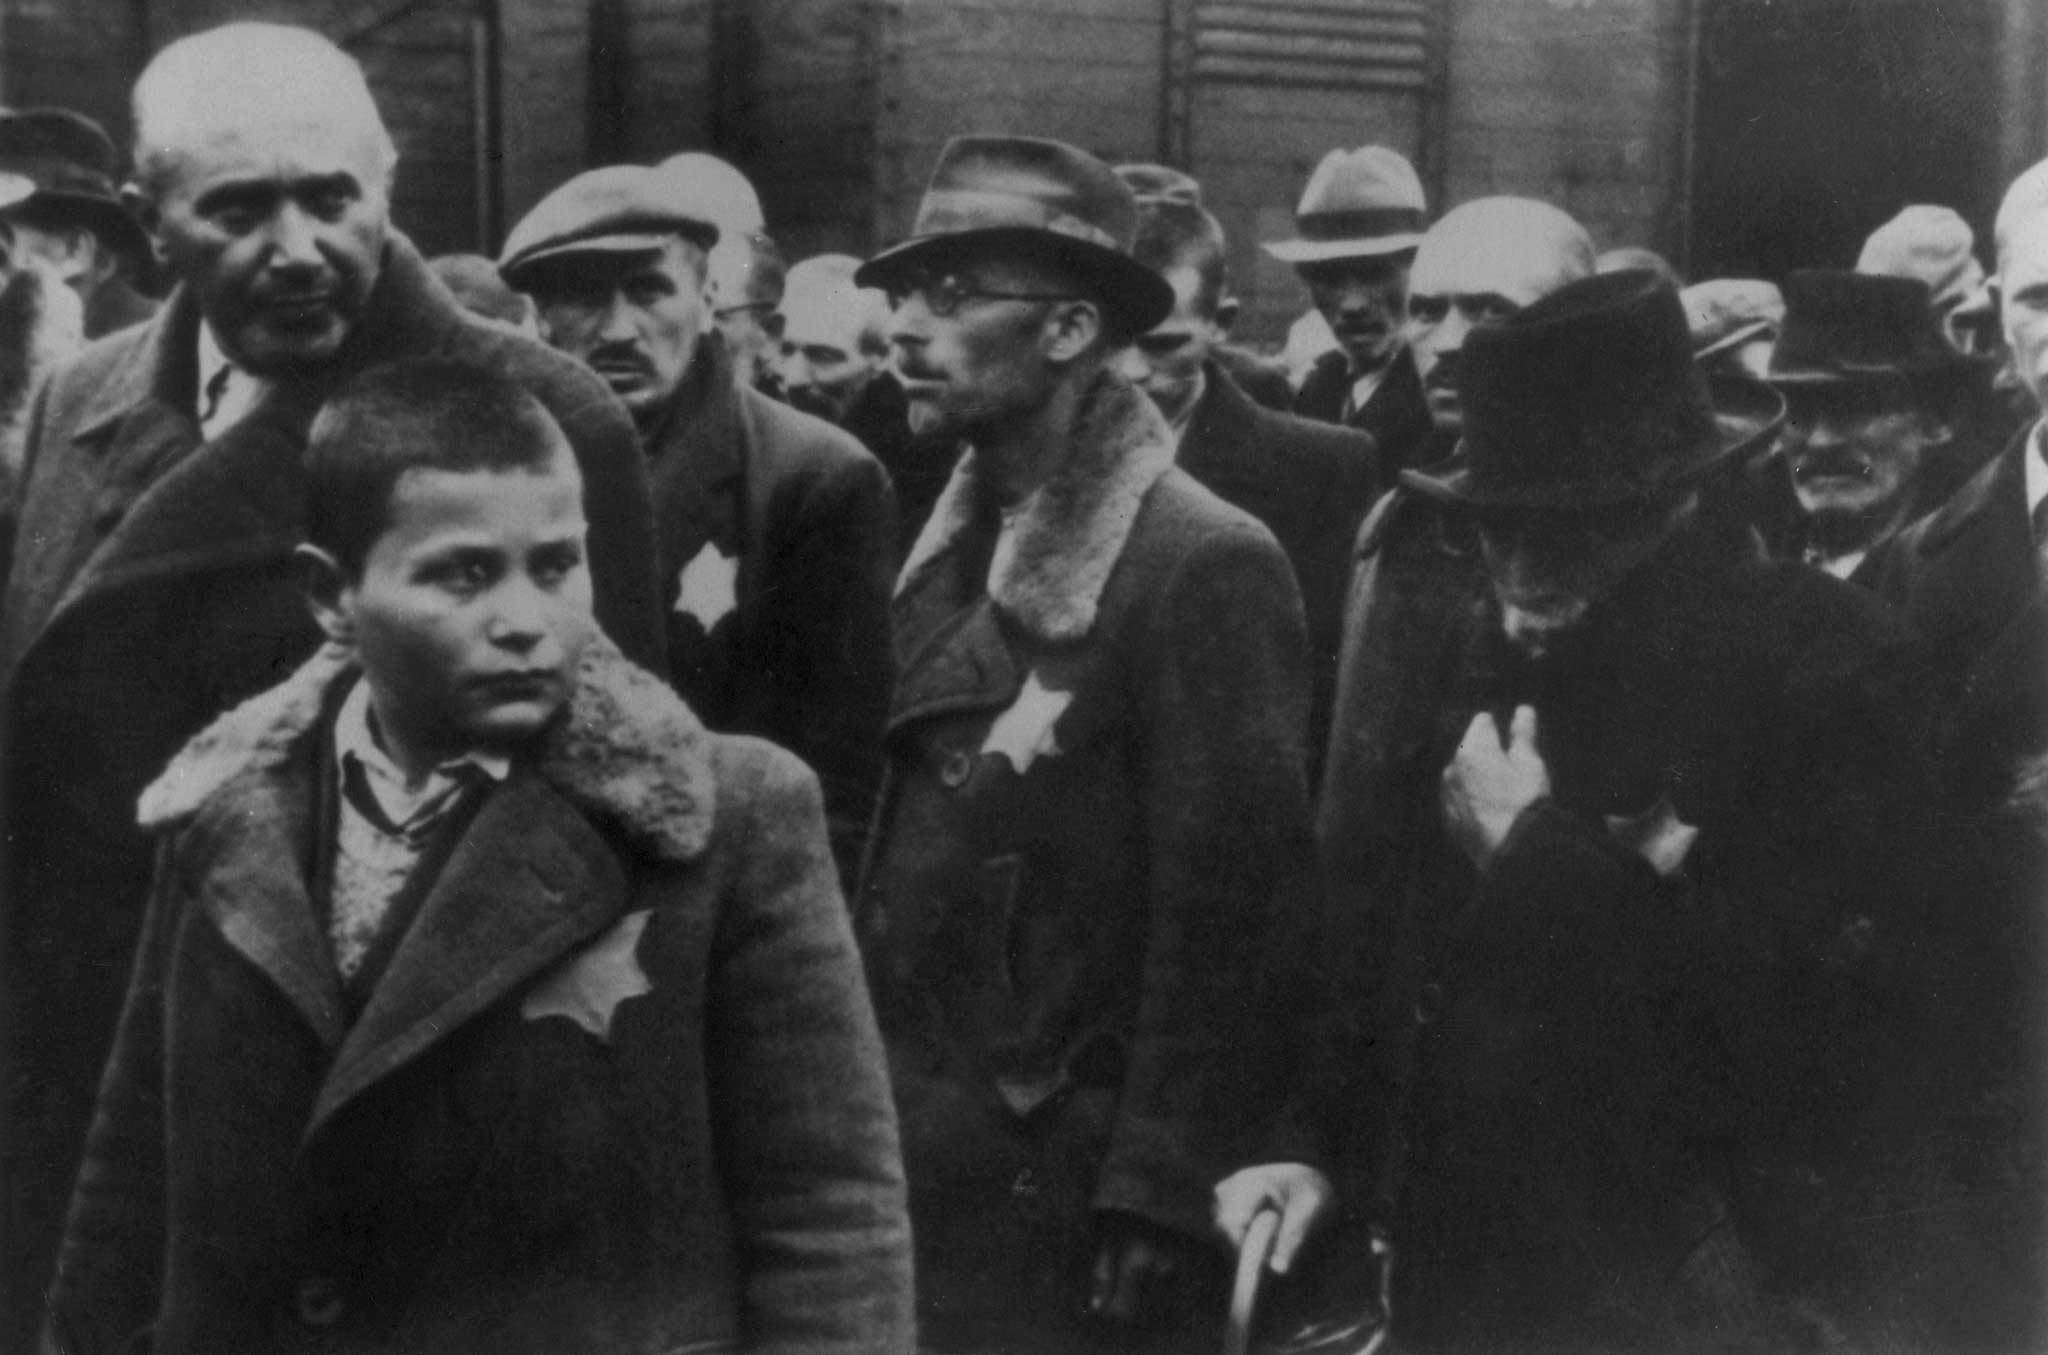 Generic suffering, and personal trauma: Jewish deportees entering Auschwitz in 1944